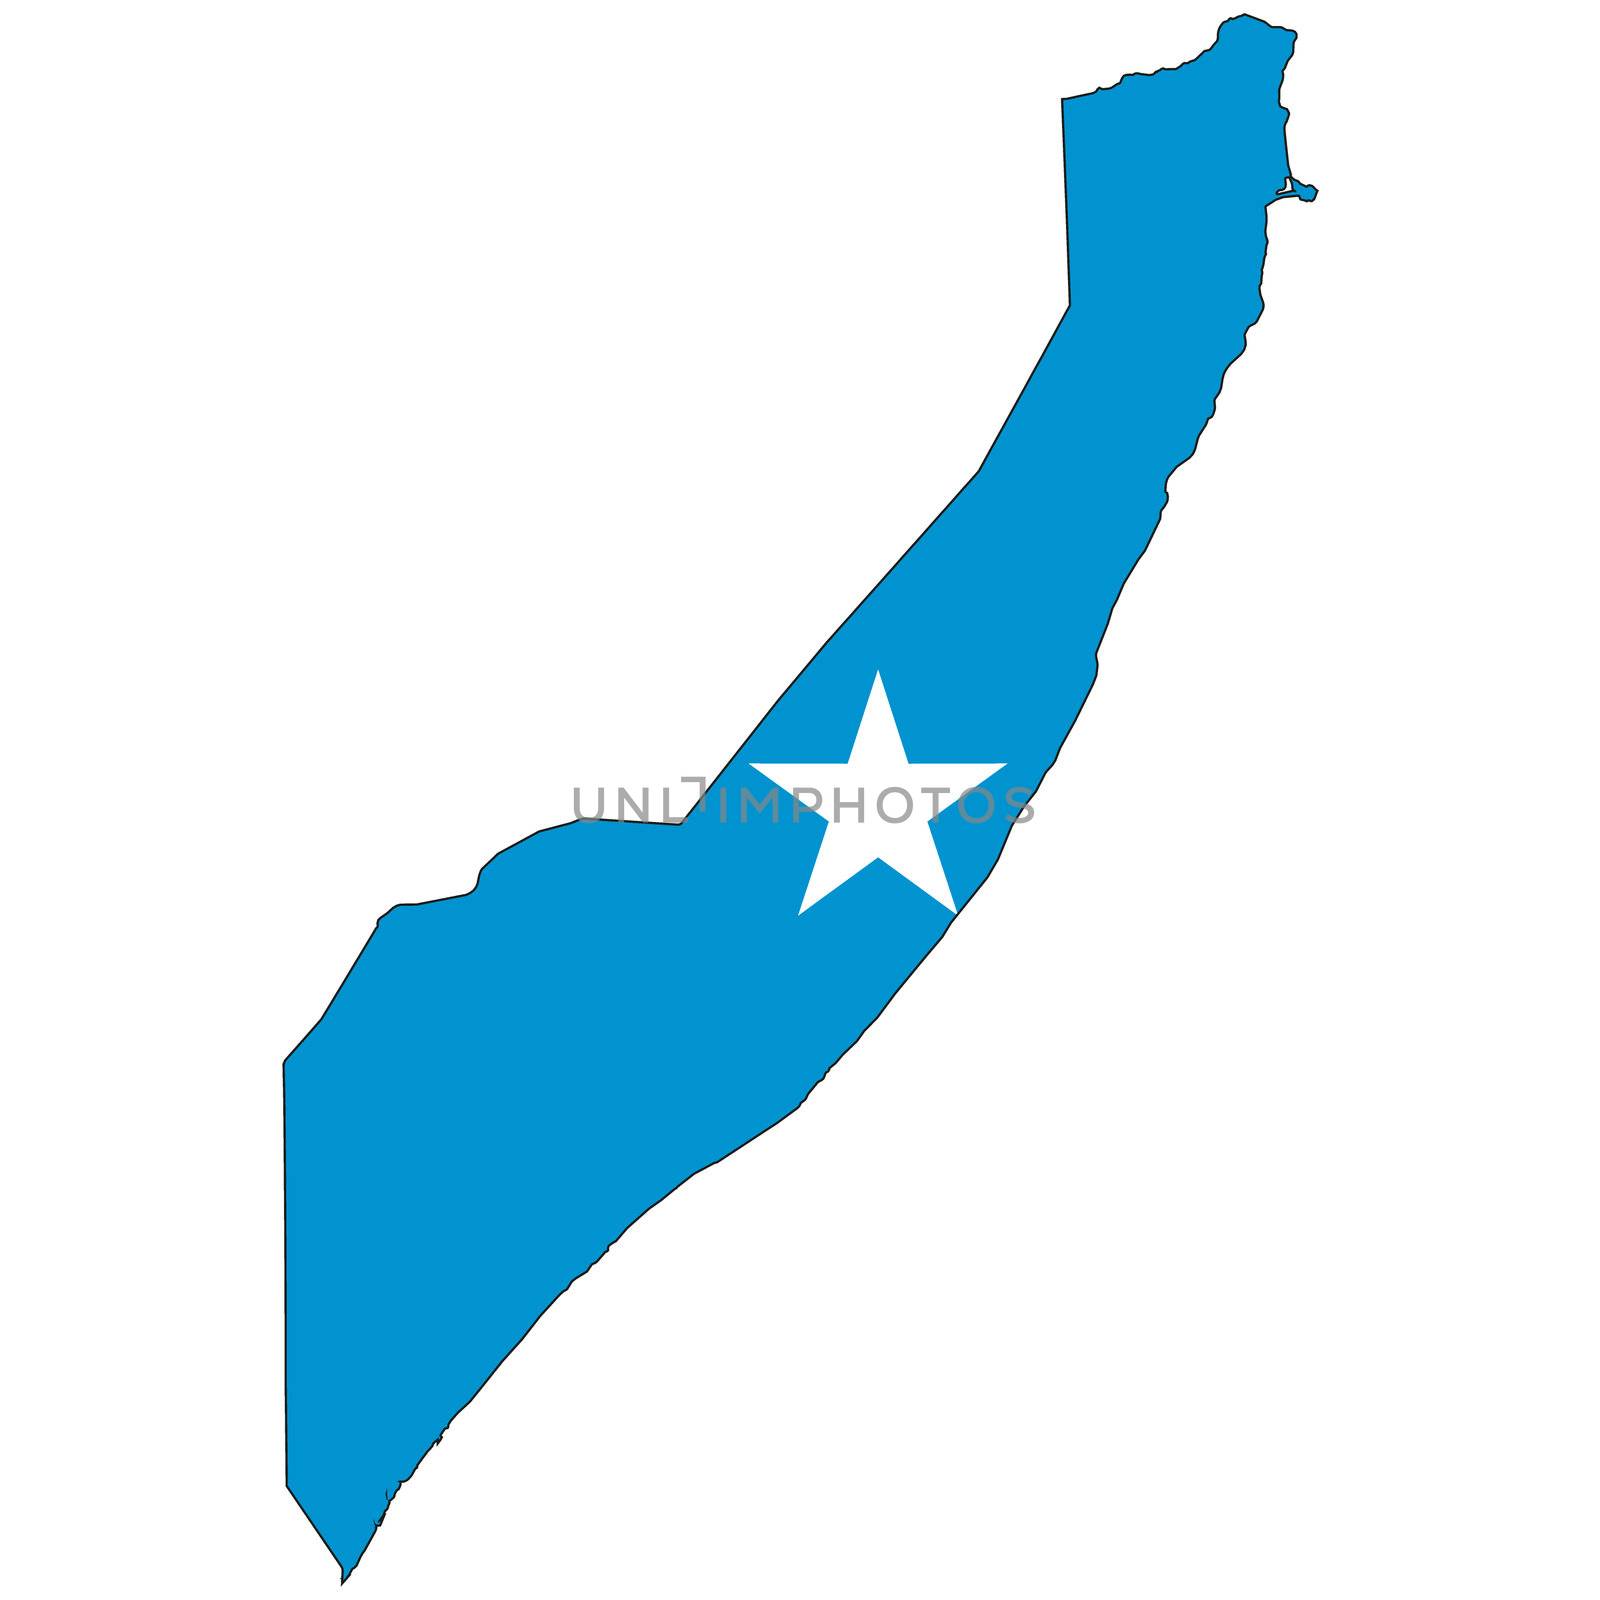 Country outline with the flag of Somalia by DragonEyeMedia